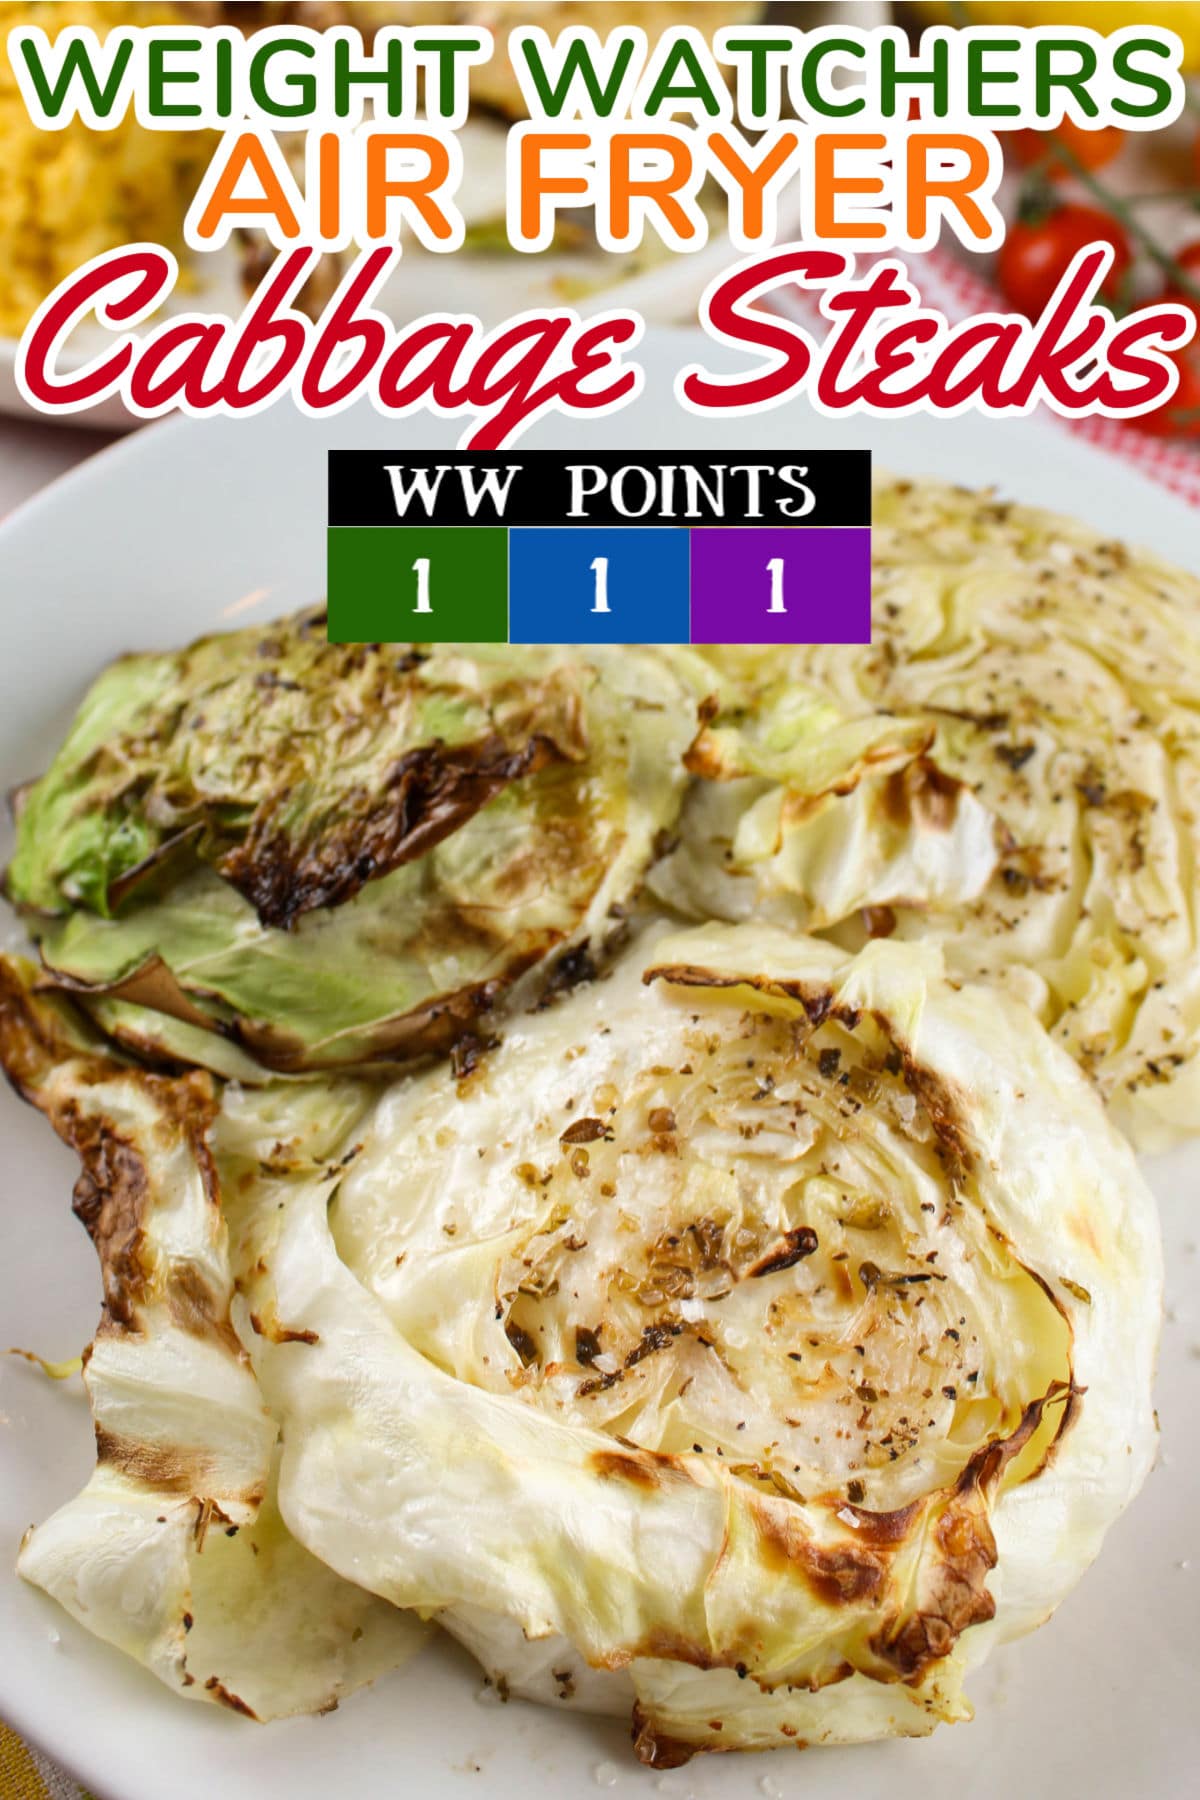 Air Fryer Cabbage Steaks are one of the healthiest side dishes you can make and they are done in 10 minutes! I dabbed on just a bit of my favorite salad dressing to make them even tastier.  via @foodhussy